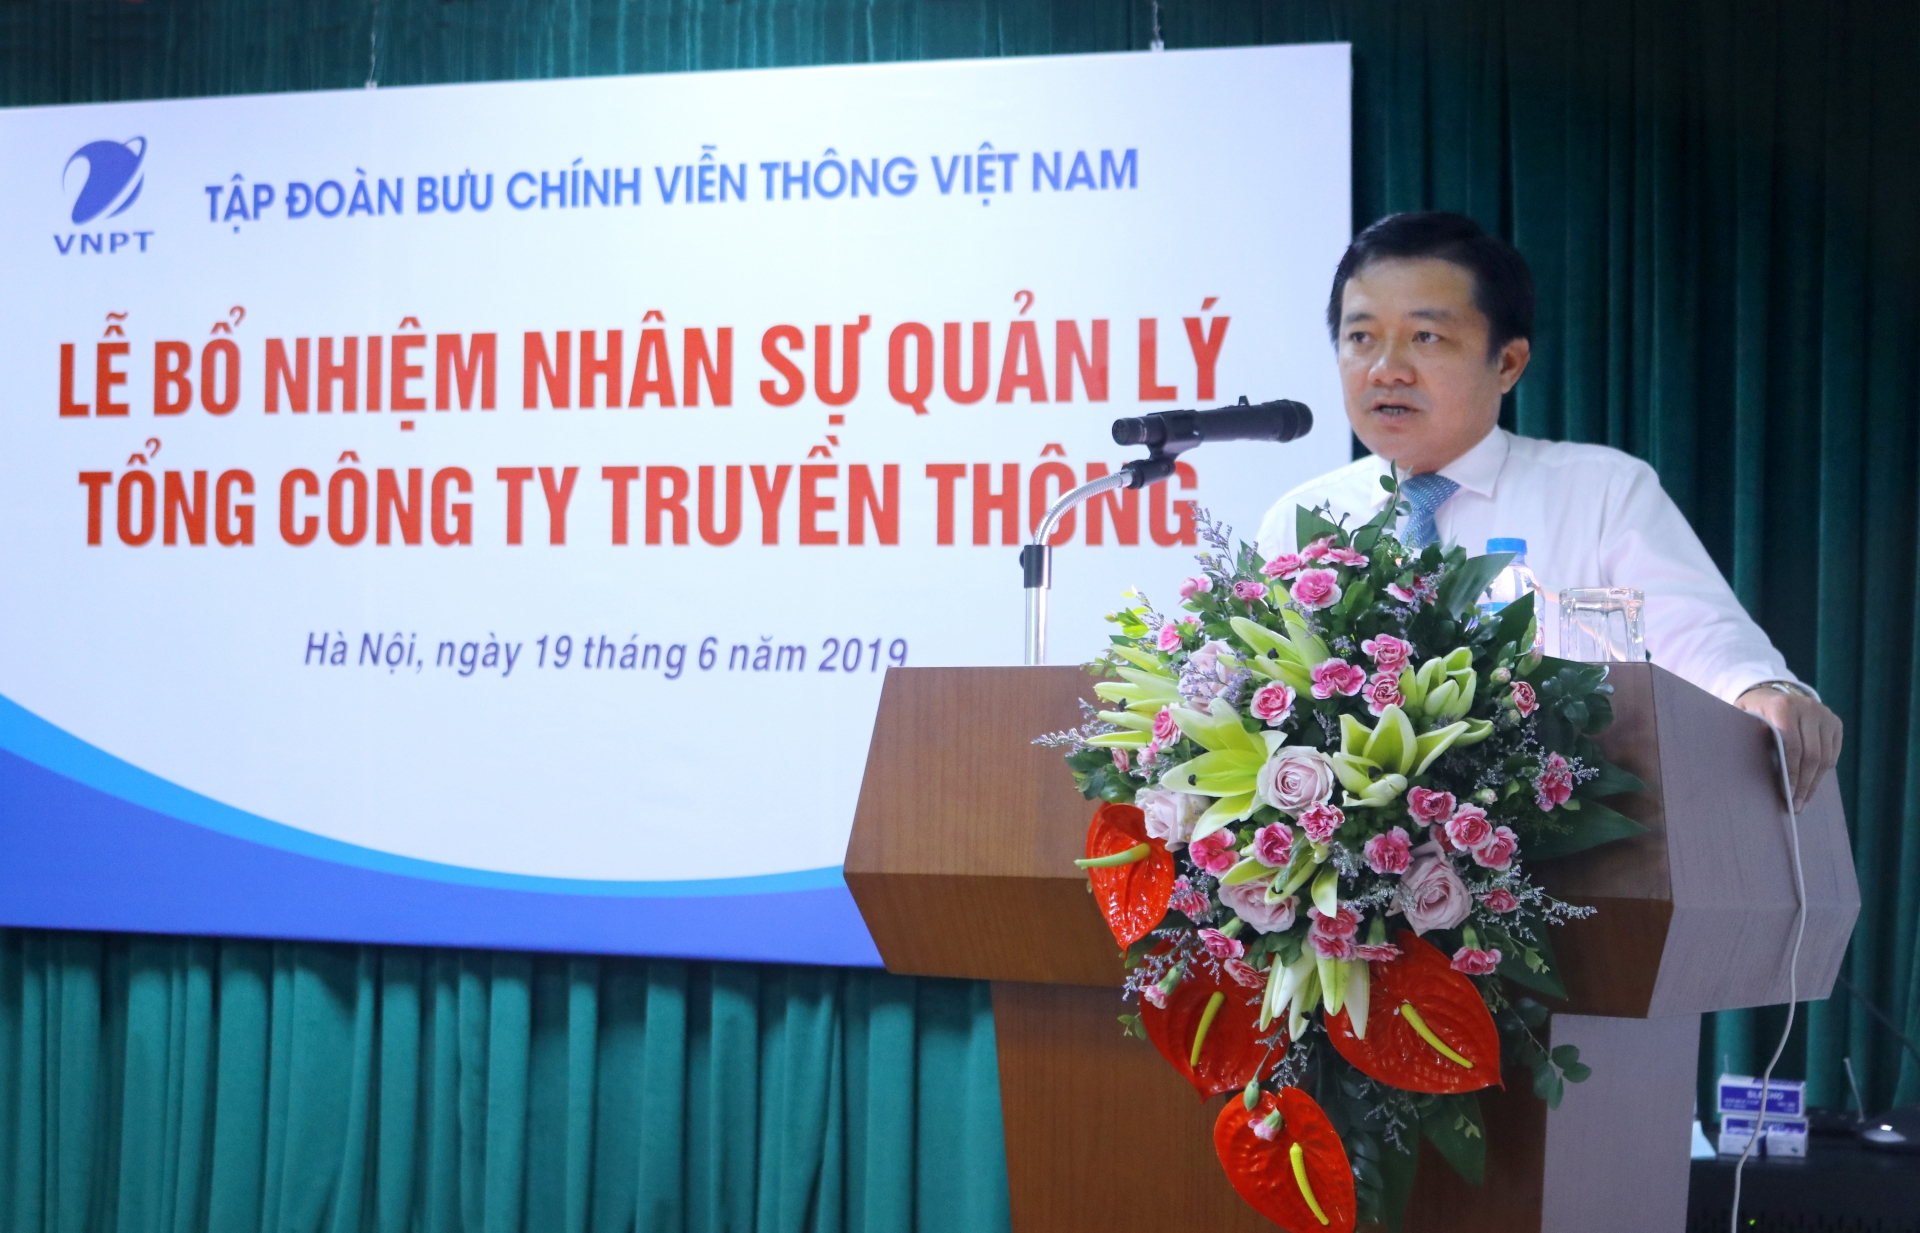 Mr. Huynh Quang Liem, Deputy General Director of the Group, VNPT-Media President giving speech at the ceremony